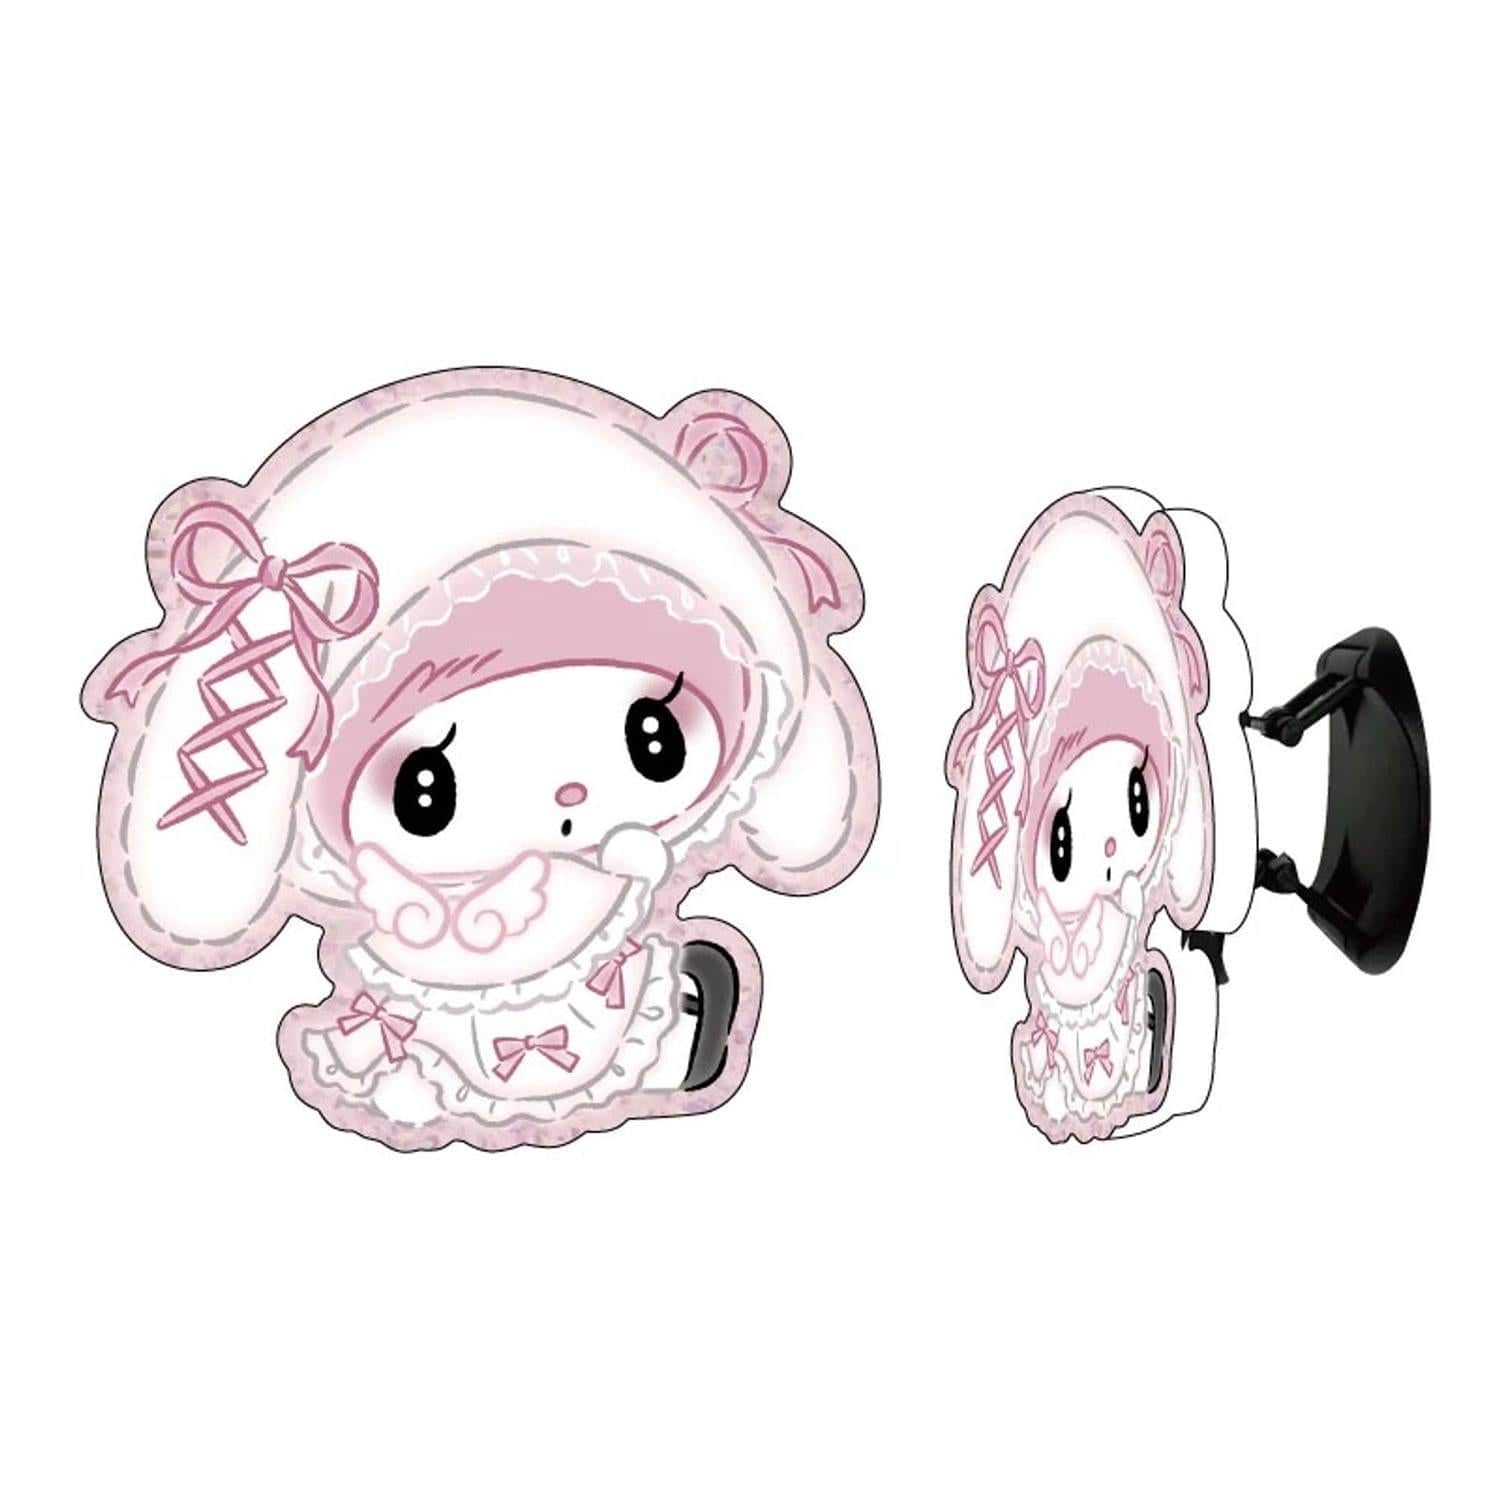 My Melody Smartphone Grip (Melokuro Collection)